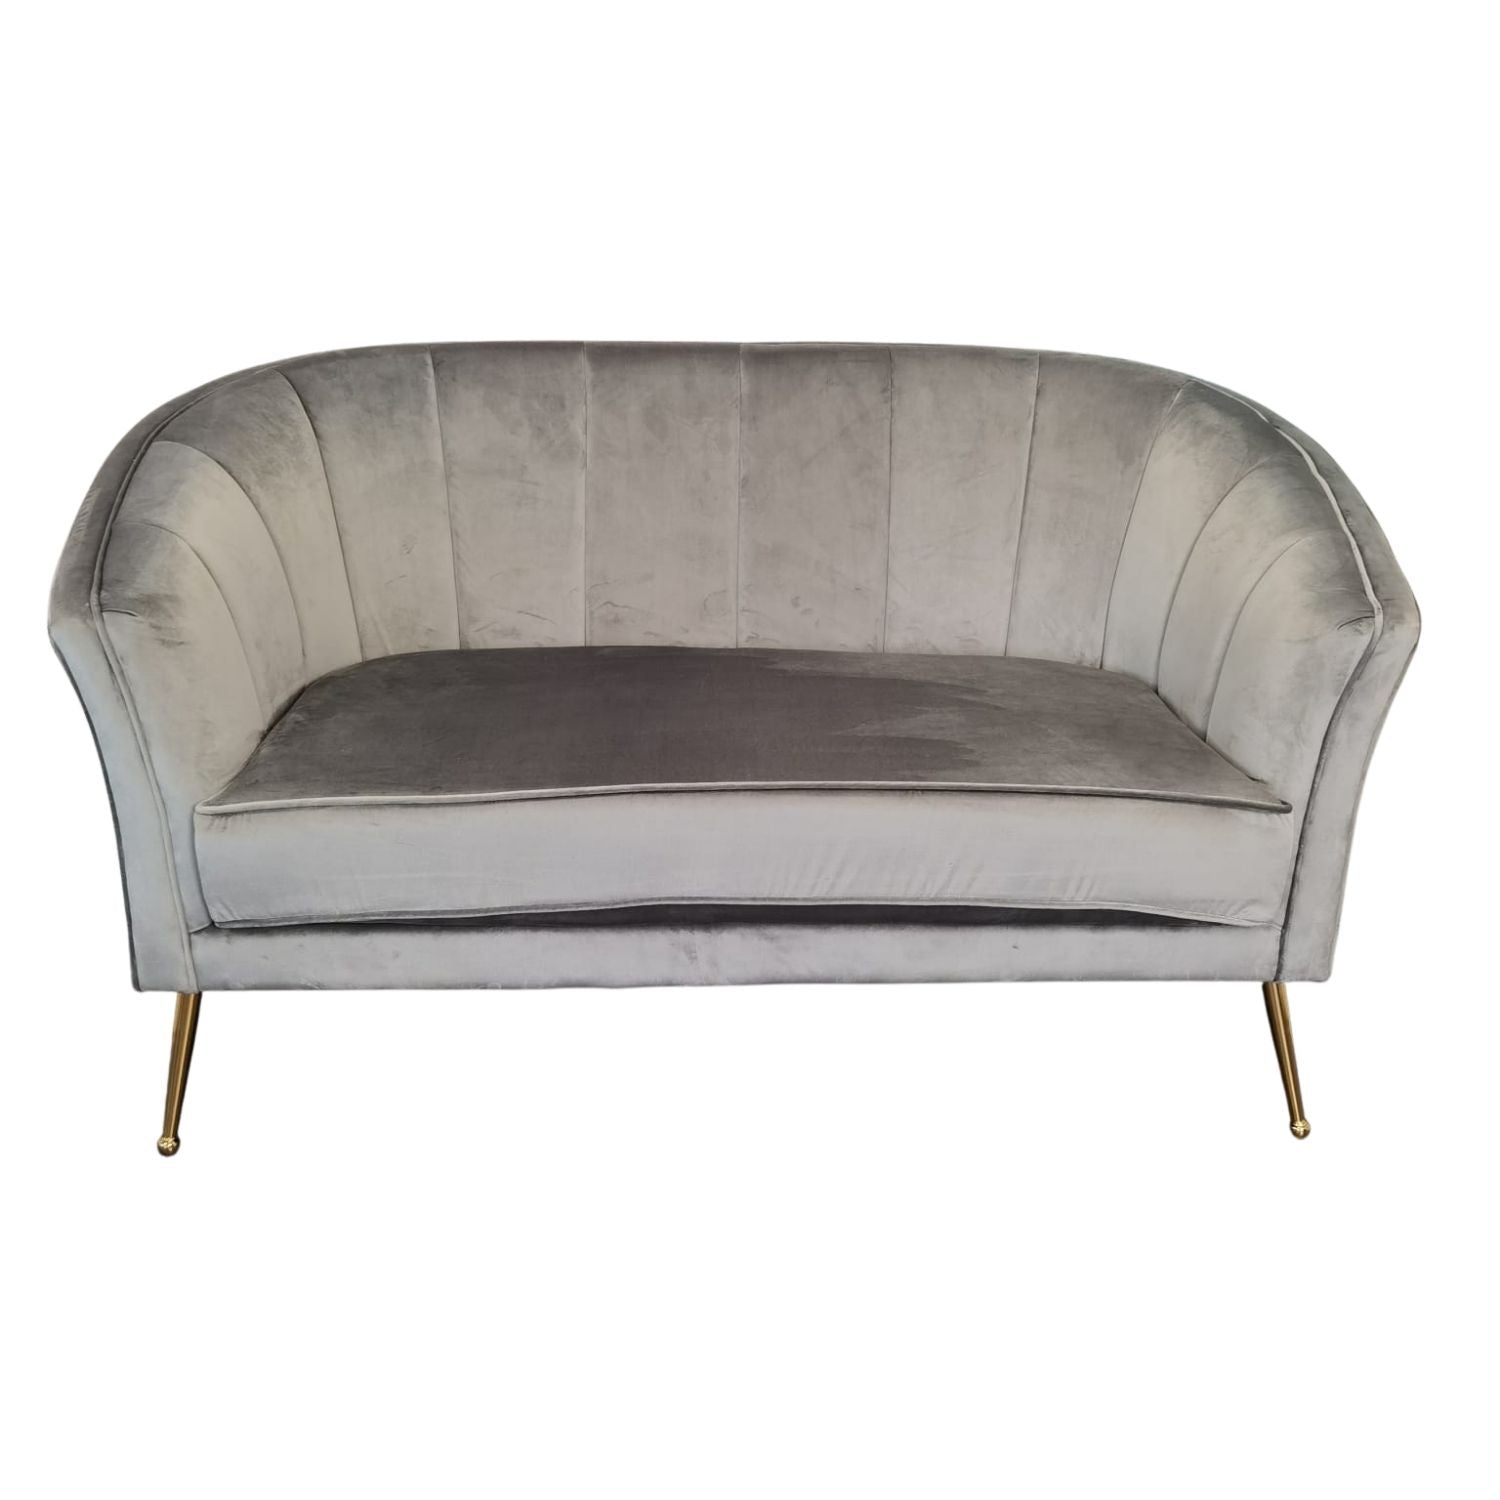 The Home Living Room 2 Seater Sofa - Grey 1 Shaws Department Stores